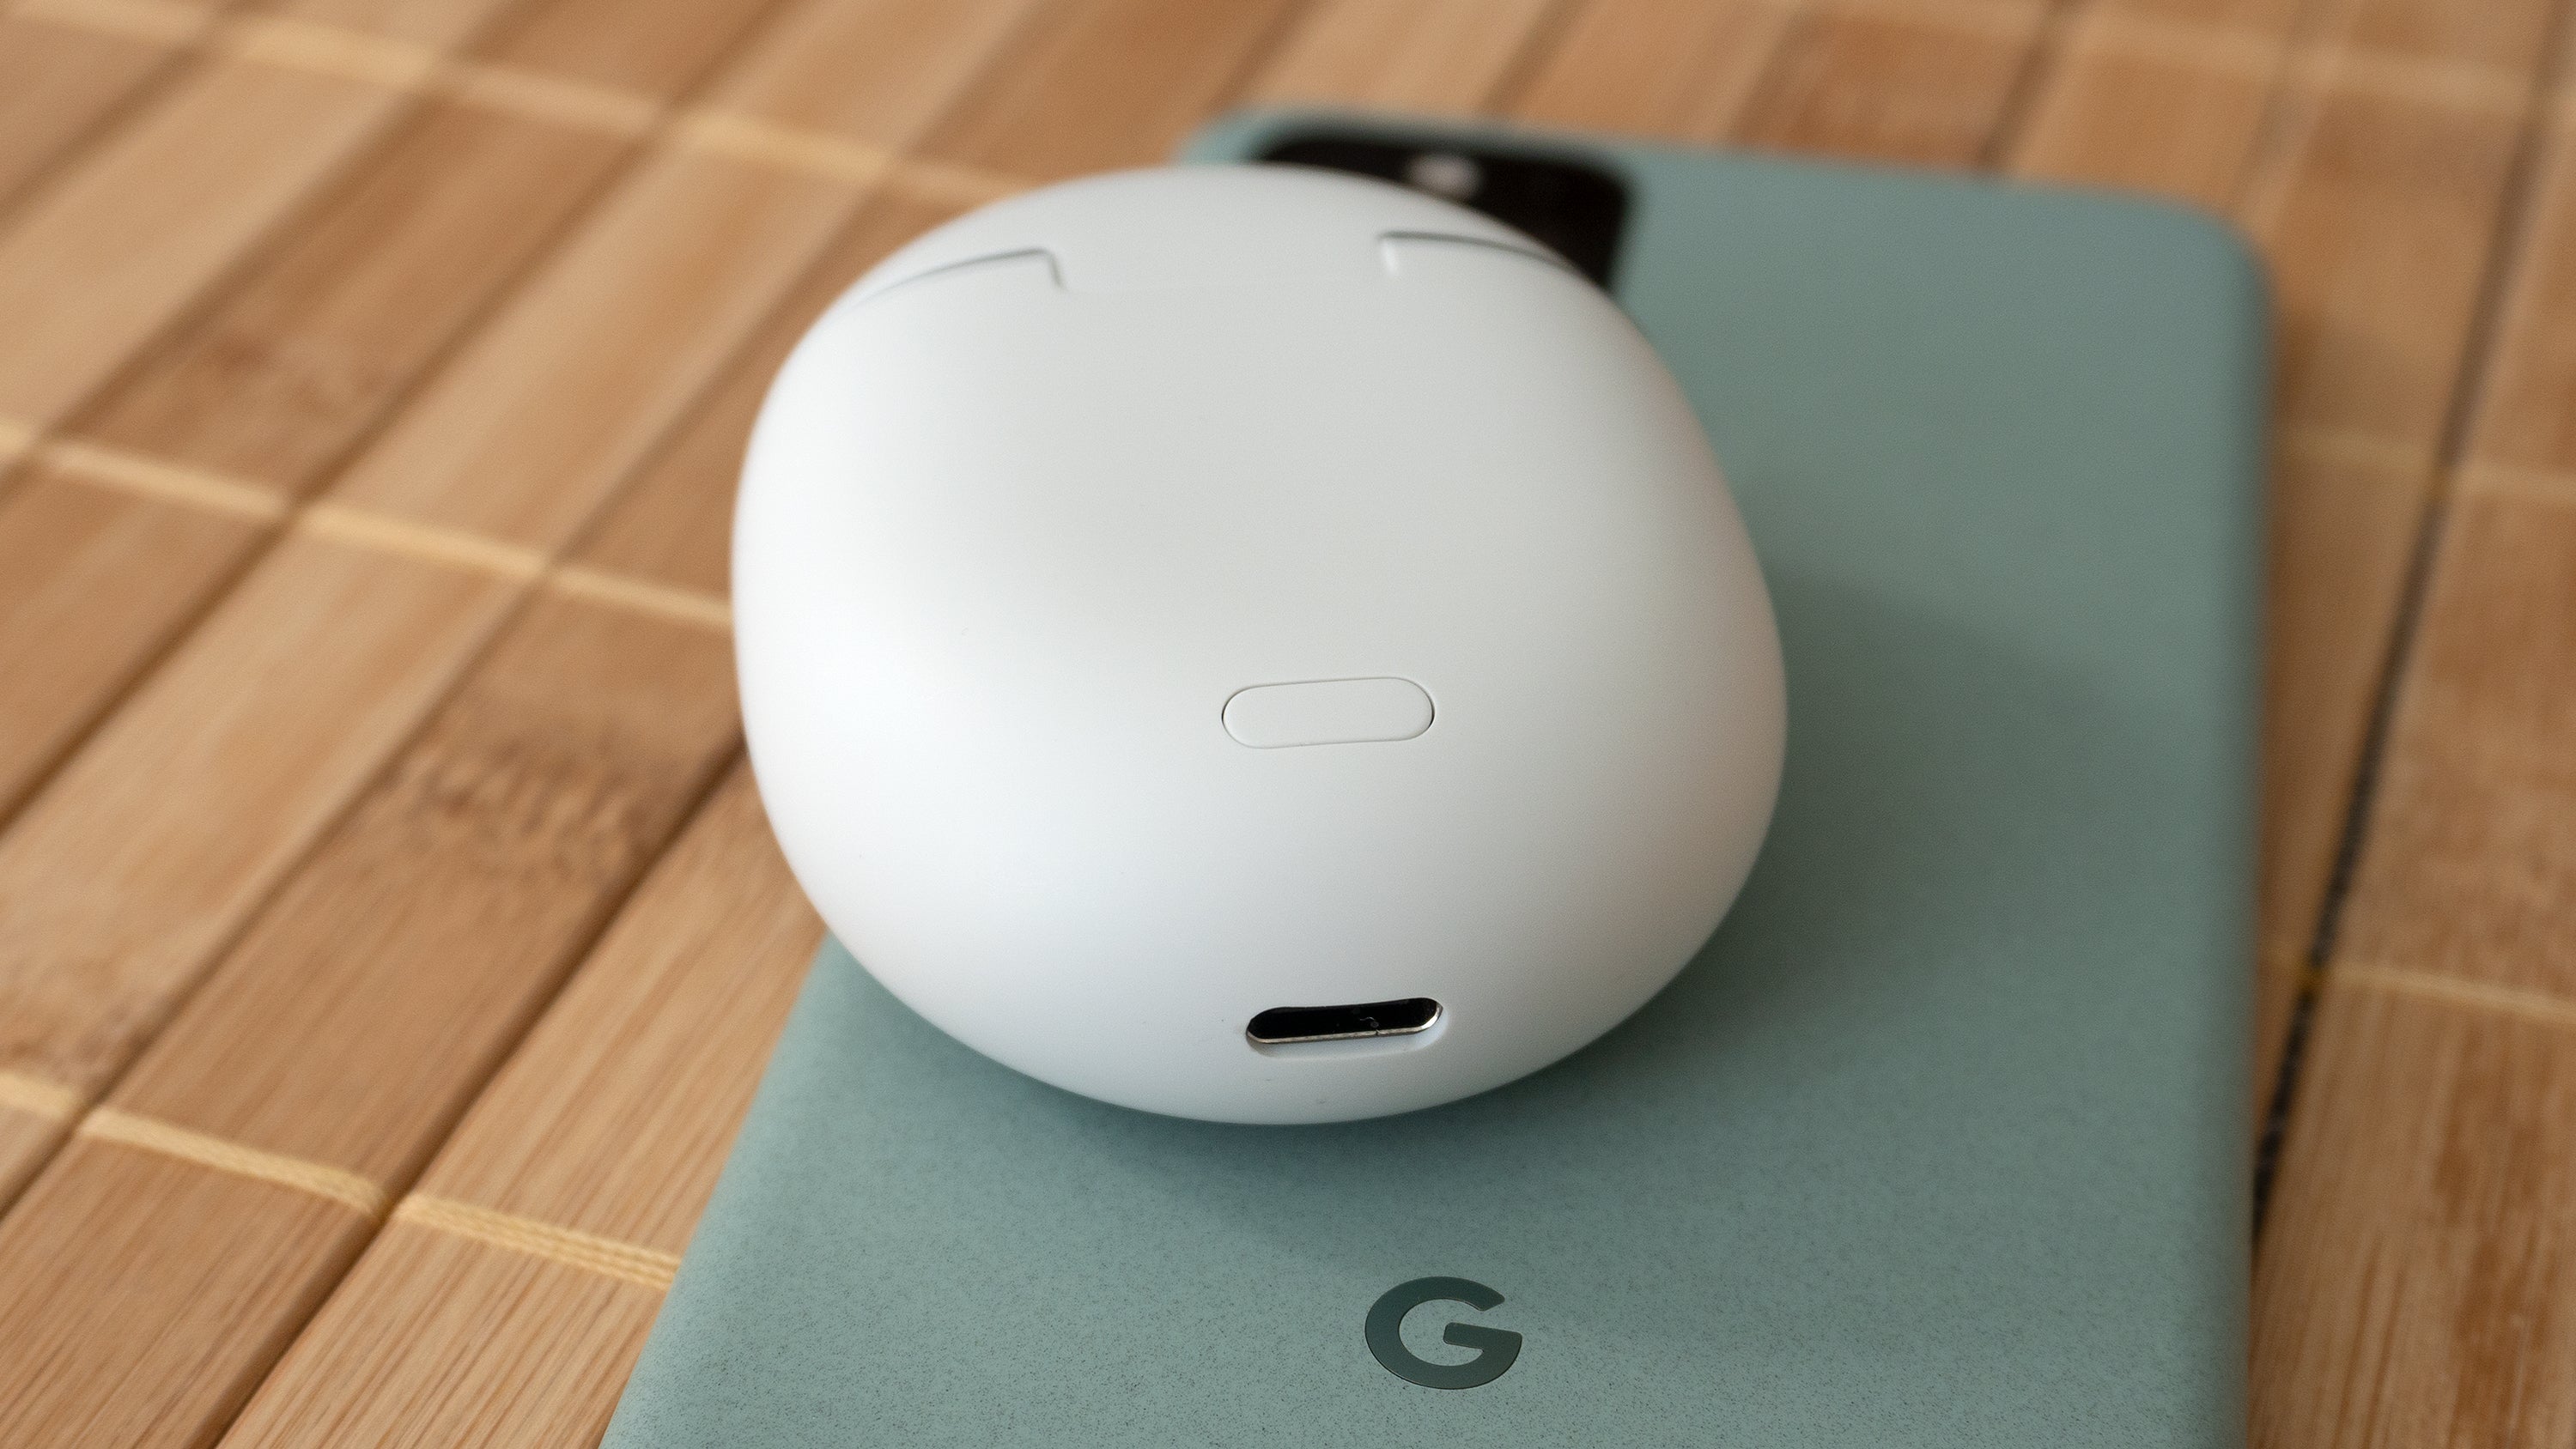 The Pixel Buds Pro can be charged on a Qi wireless charging pad or with a USB-C cable. (Photo: Andrew Liszewski | Gizmodo)